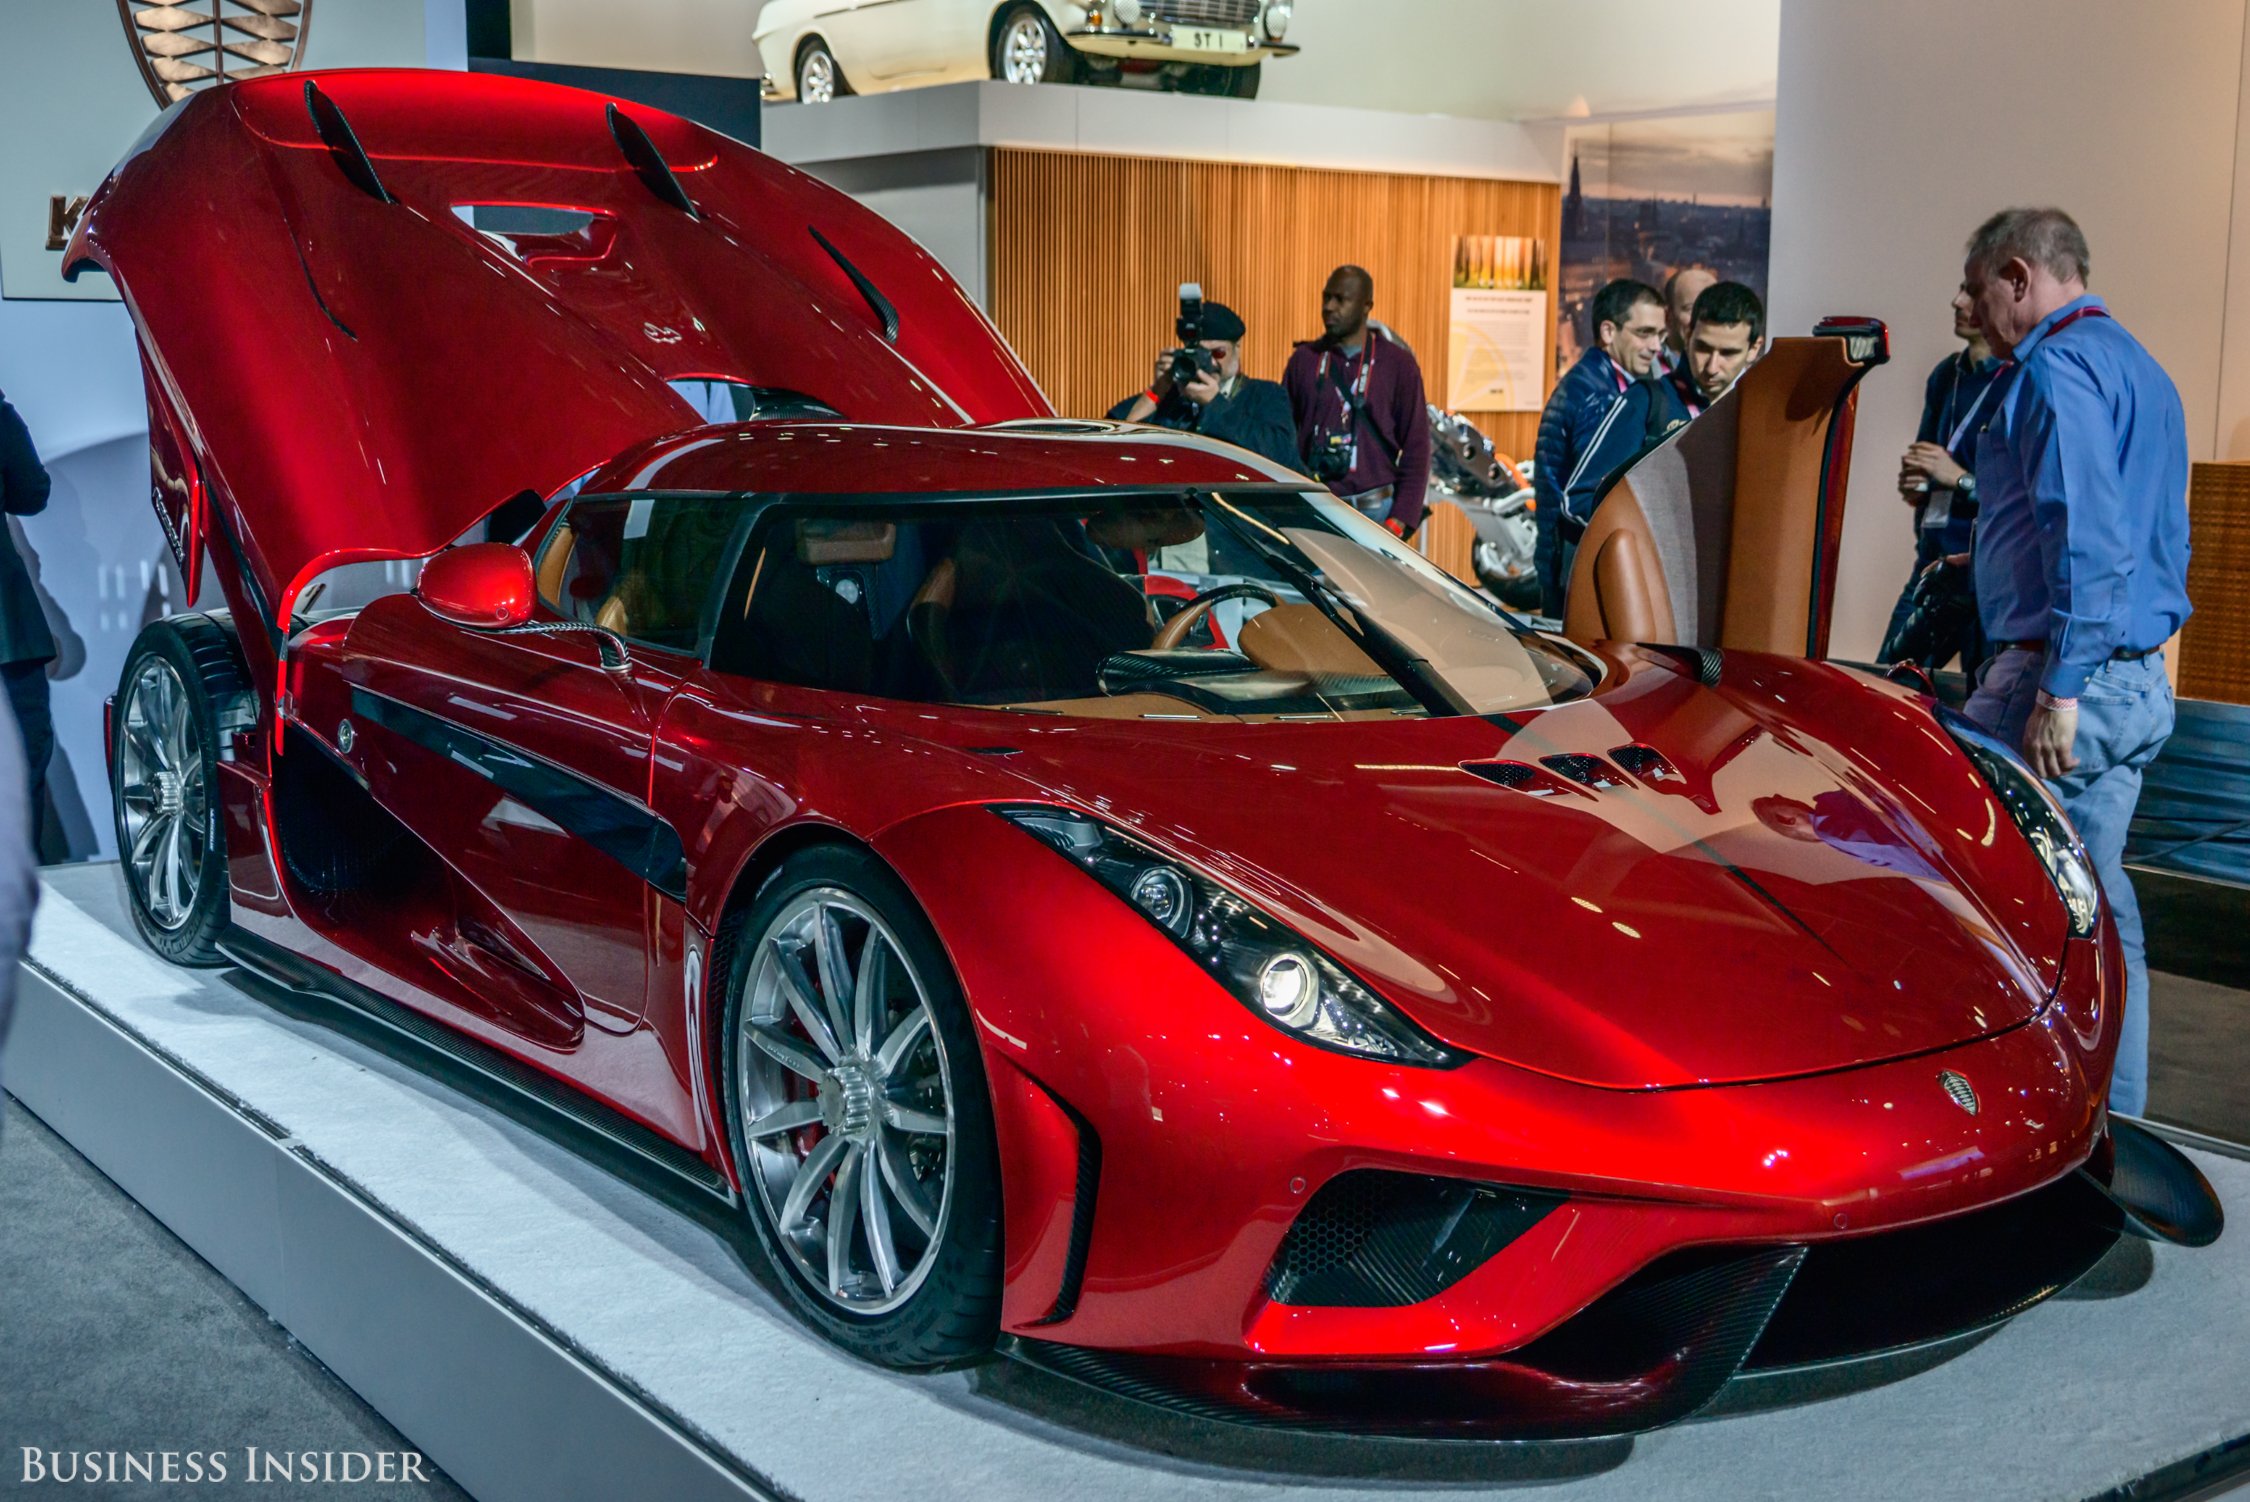 This is the hybrid supercar that will give Ferrari, McLaren and Porsche nightmares